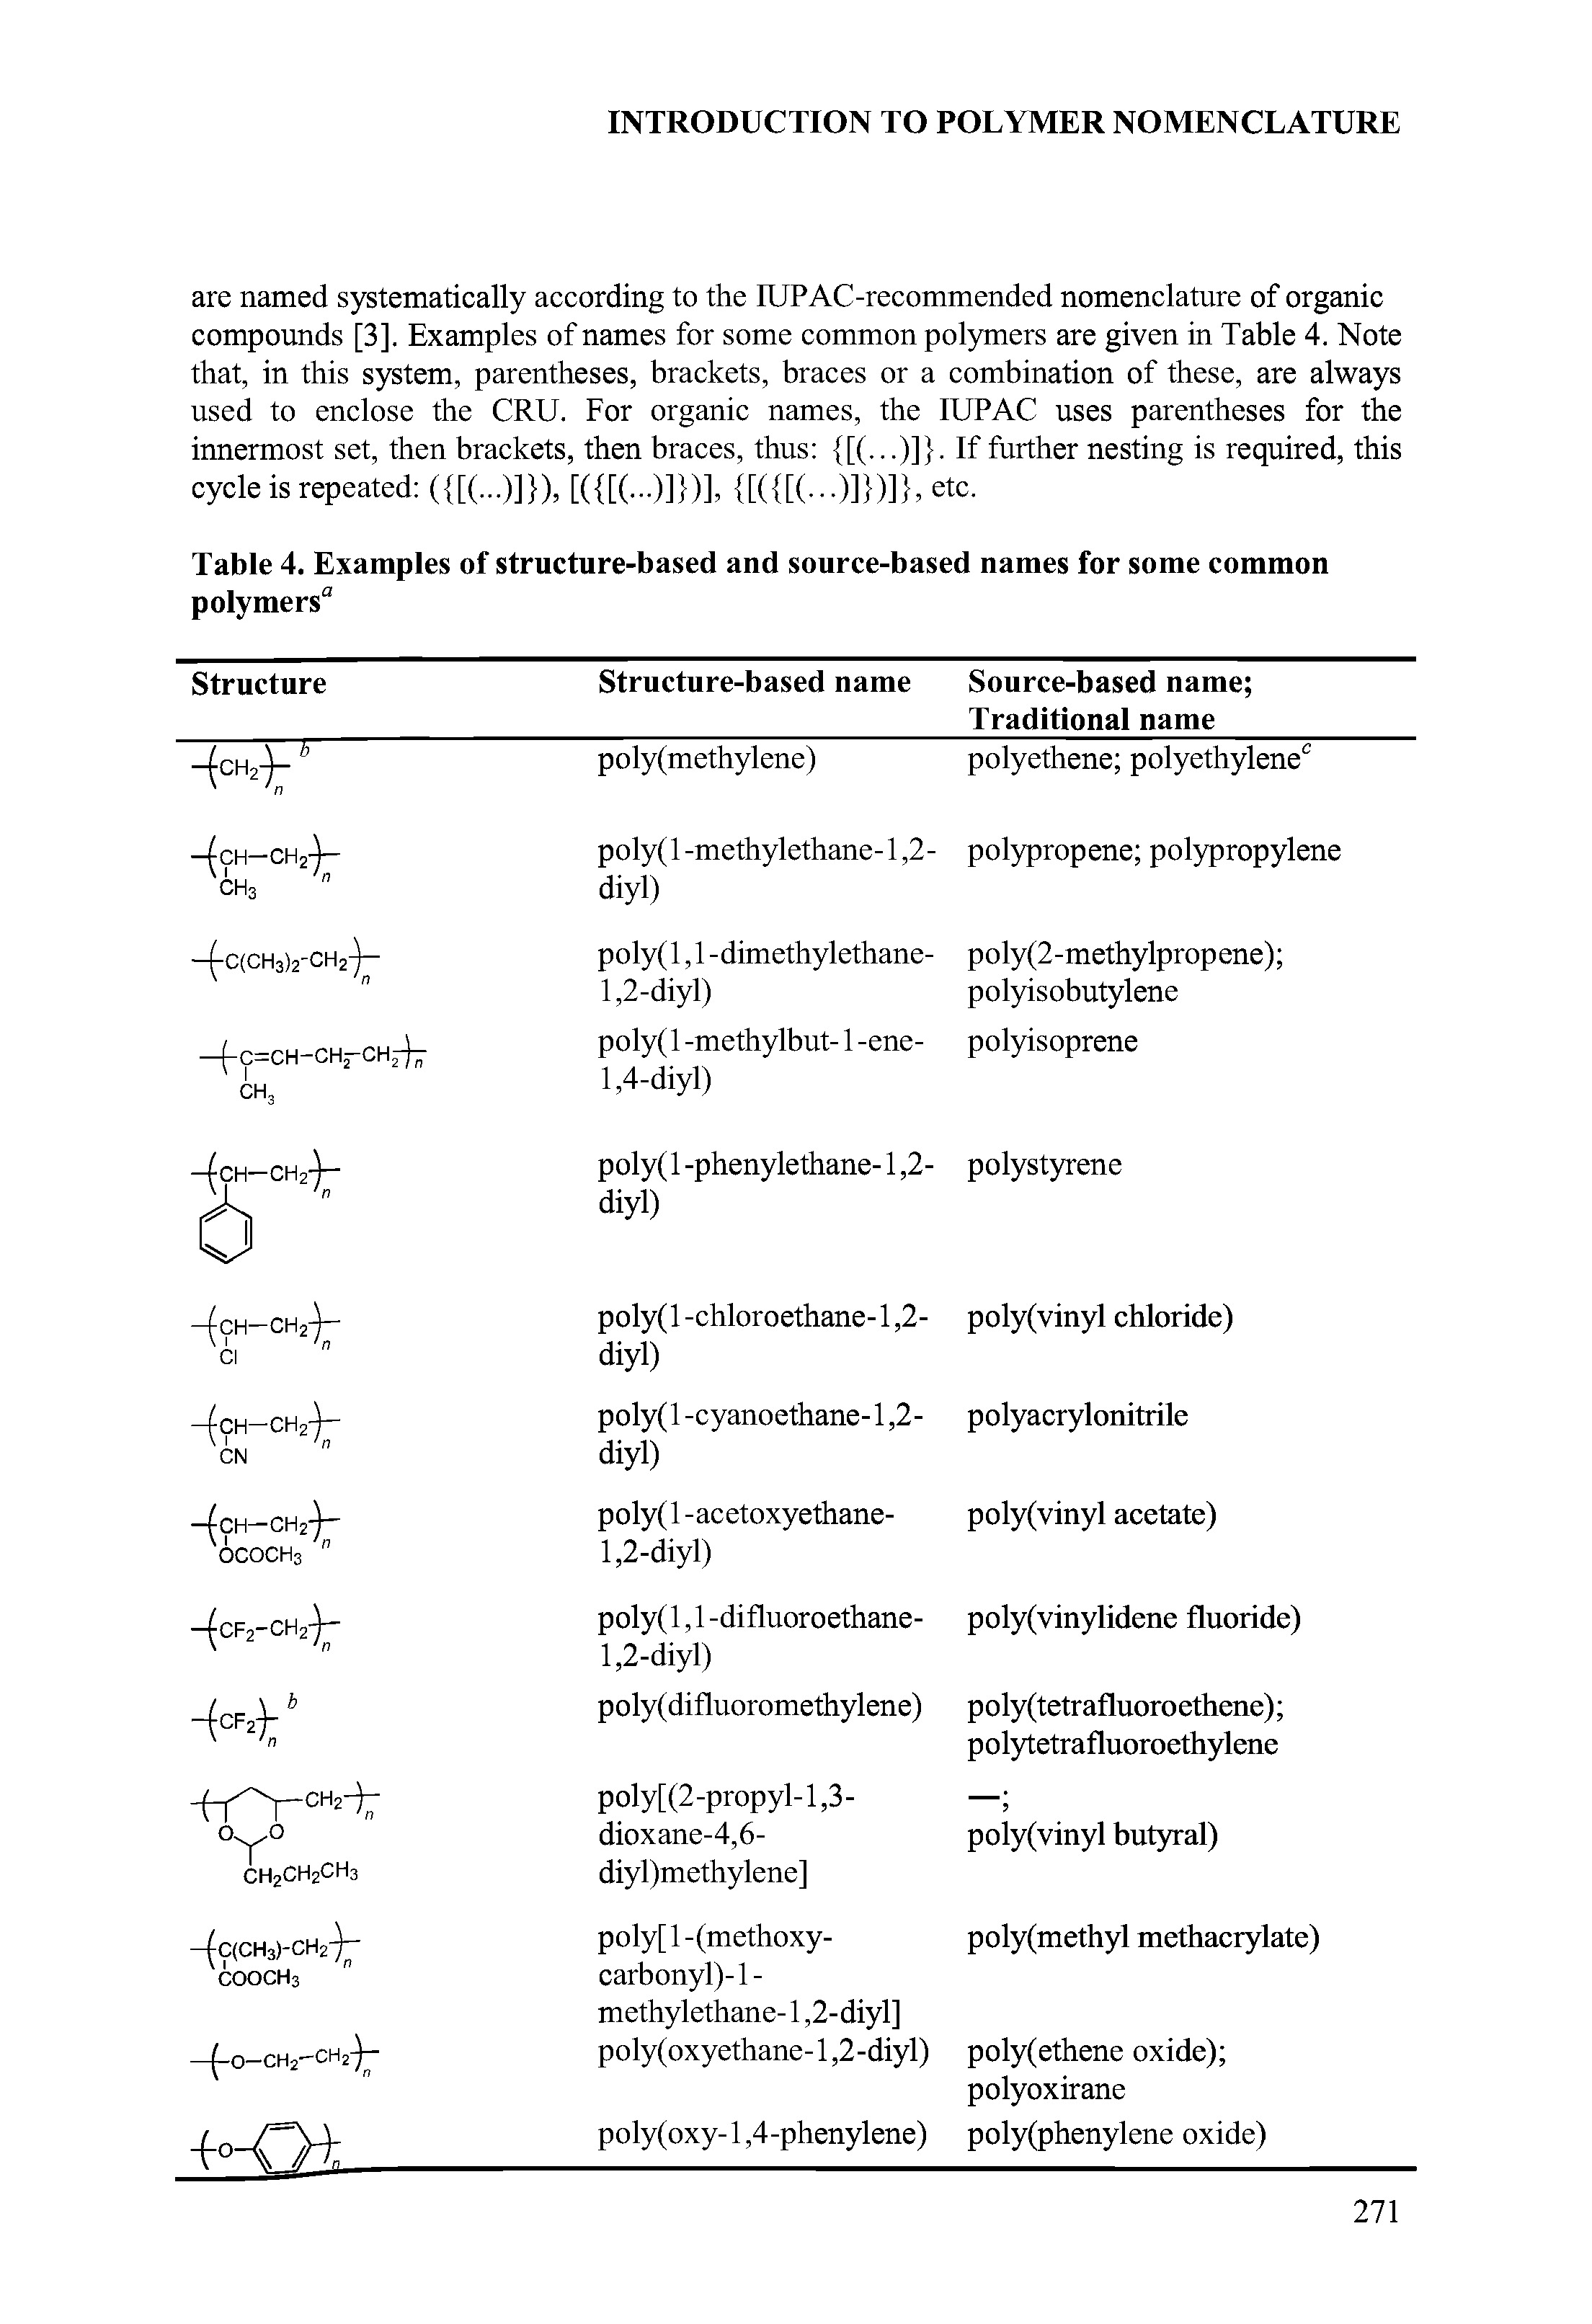 Table 4. Examples of structure-based and source-based names for some common polymers ...